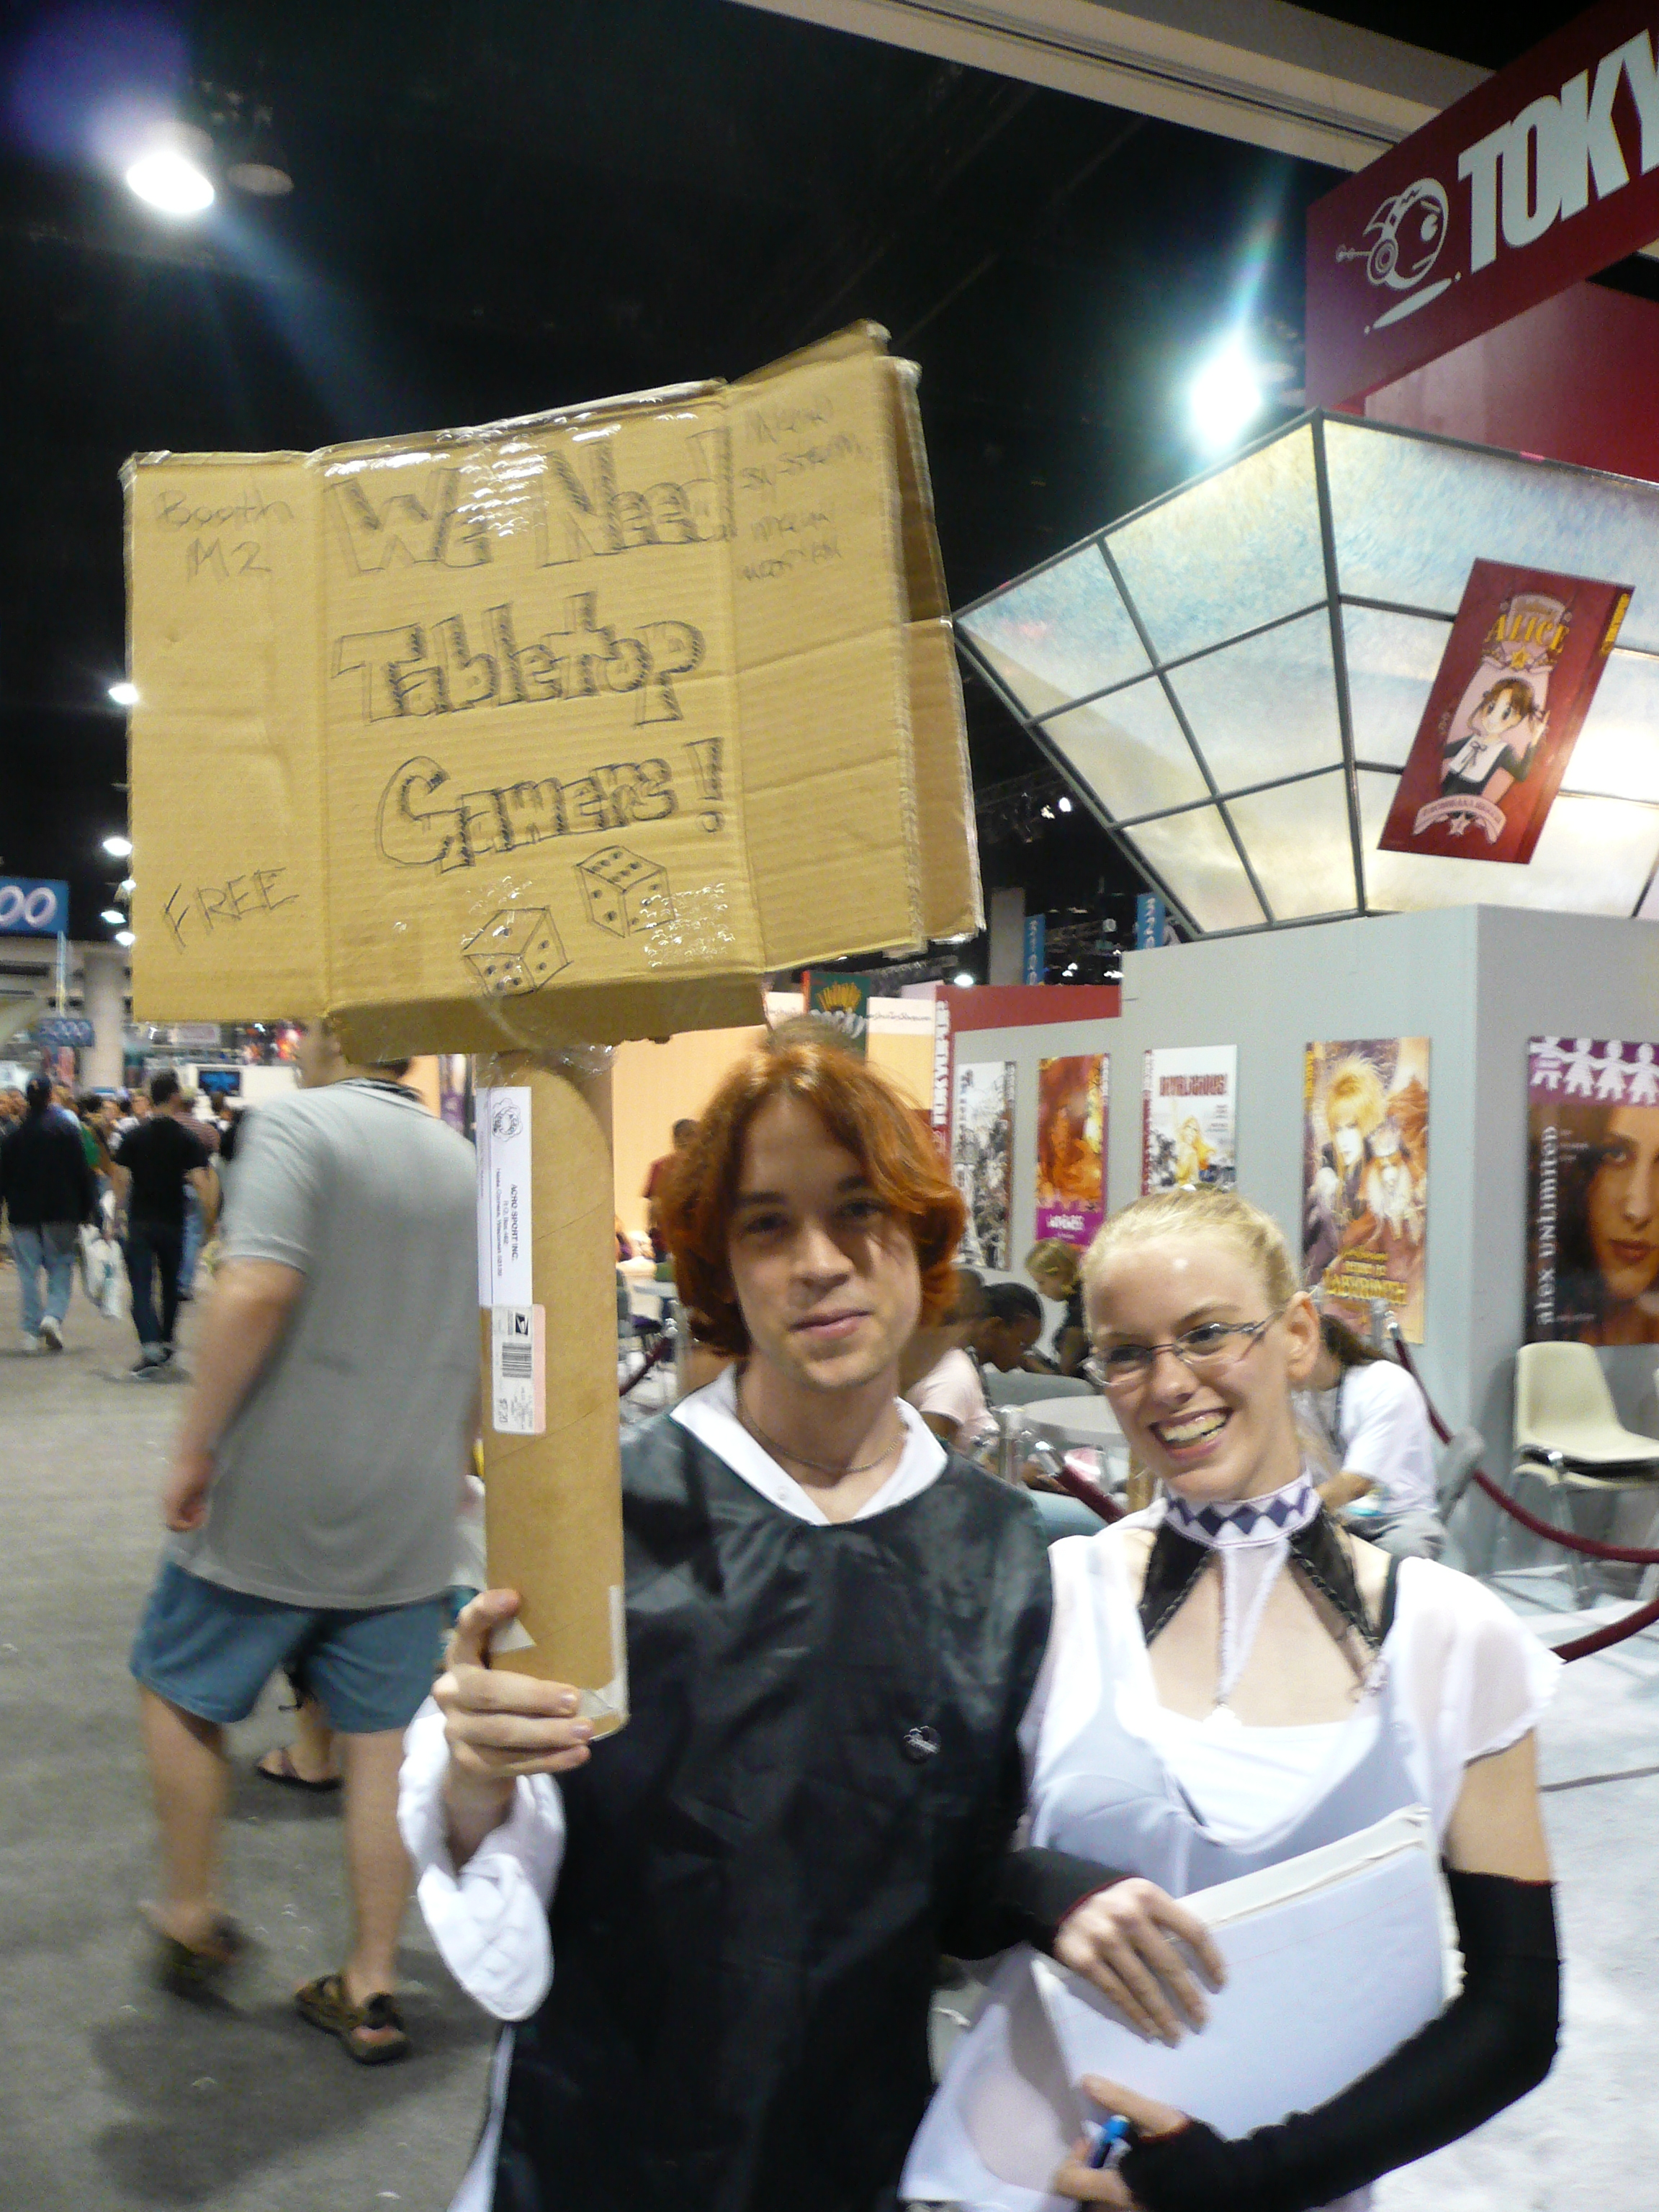 Looking for tabletop gamers sign, ComicCon 2007, San Diego, CA.jpg by gruntzooki, on Flickr